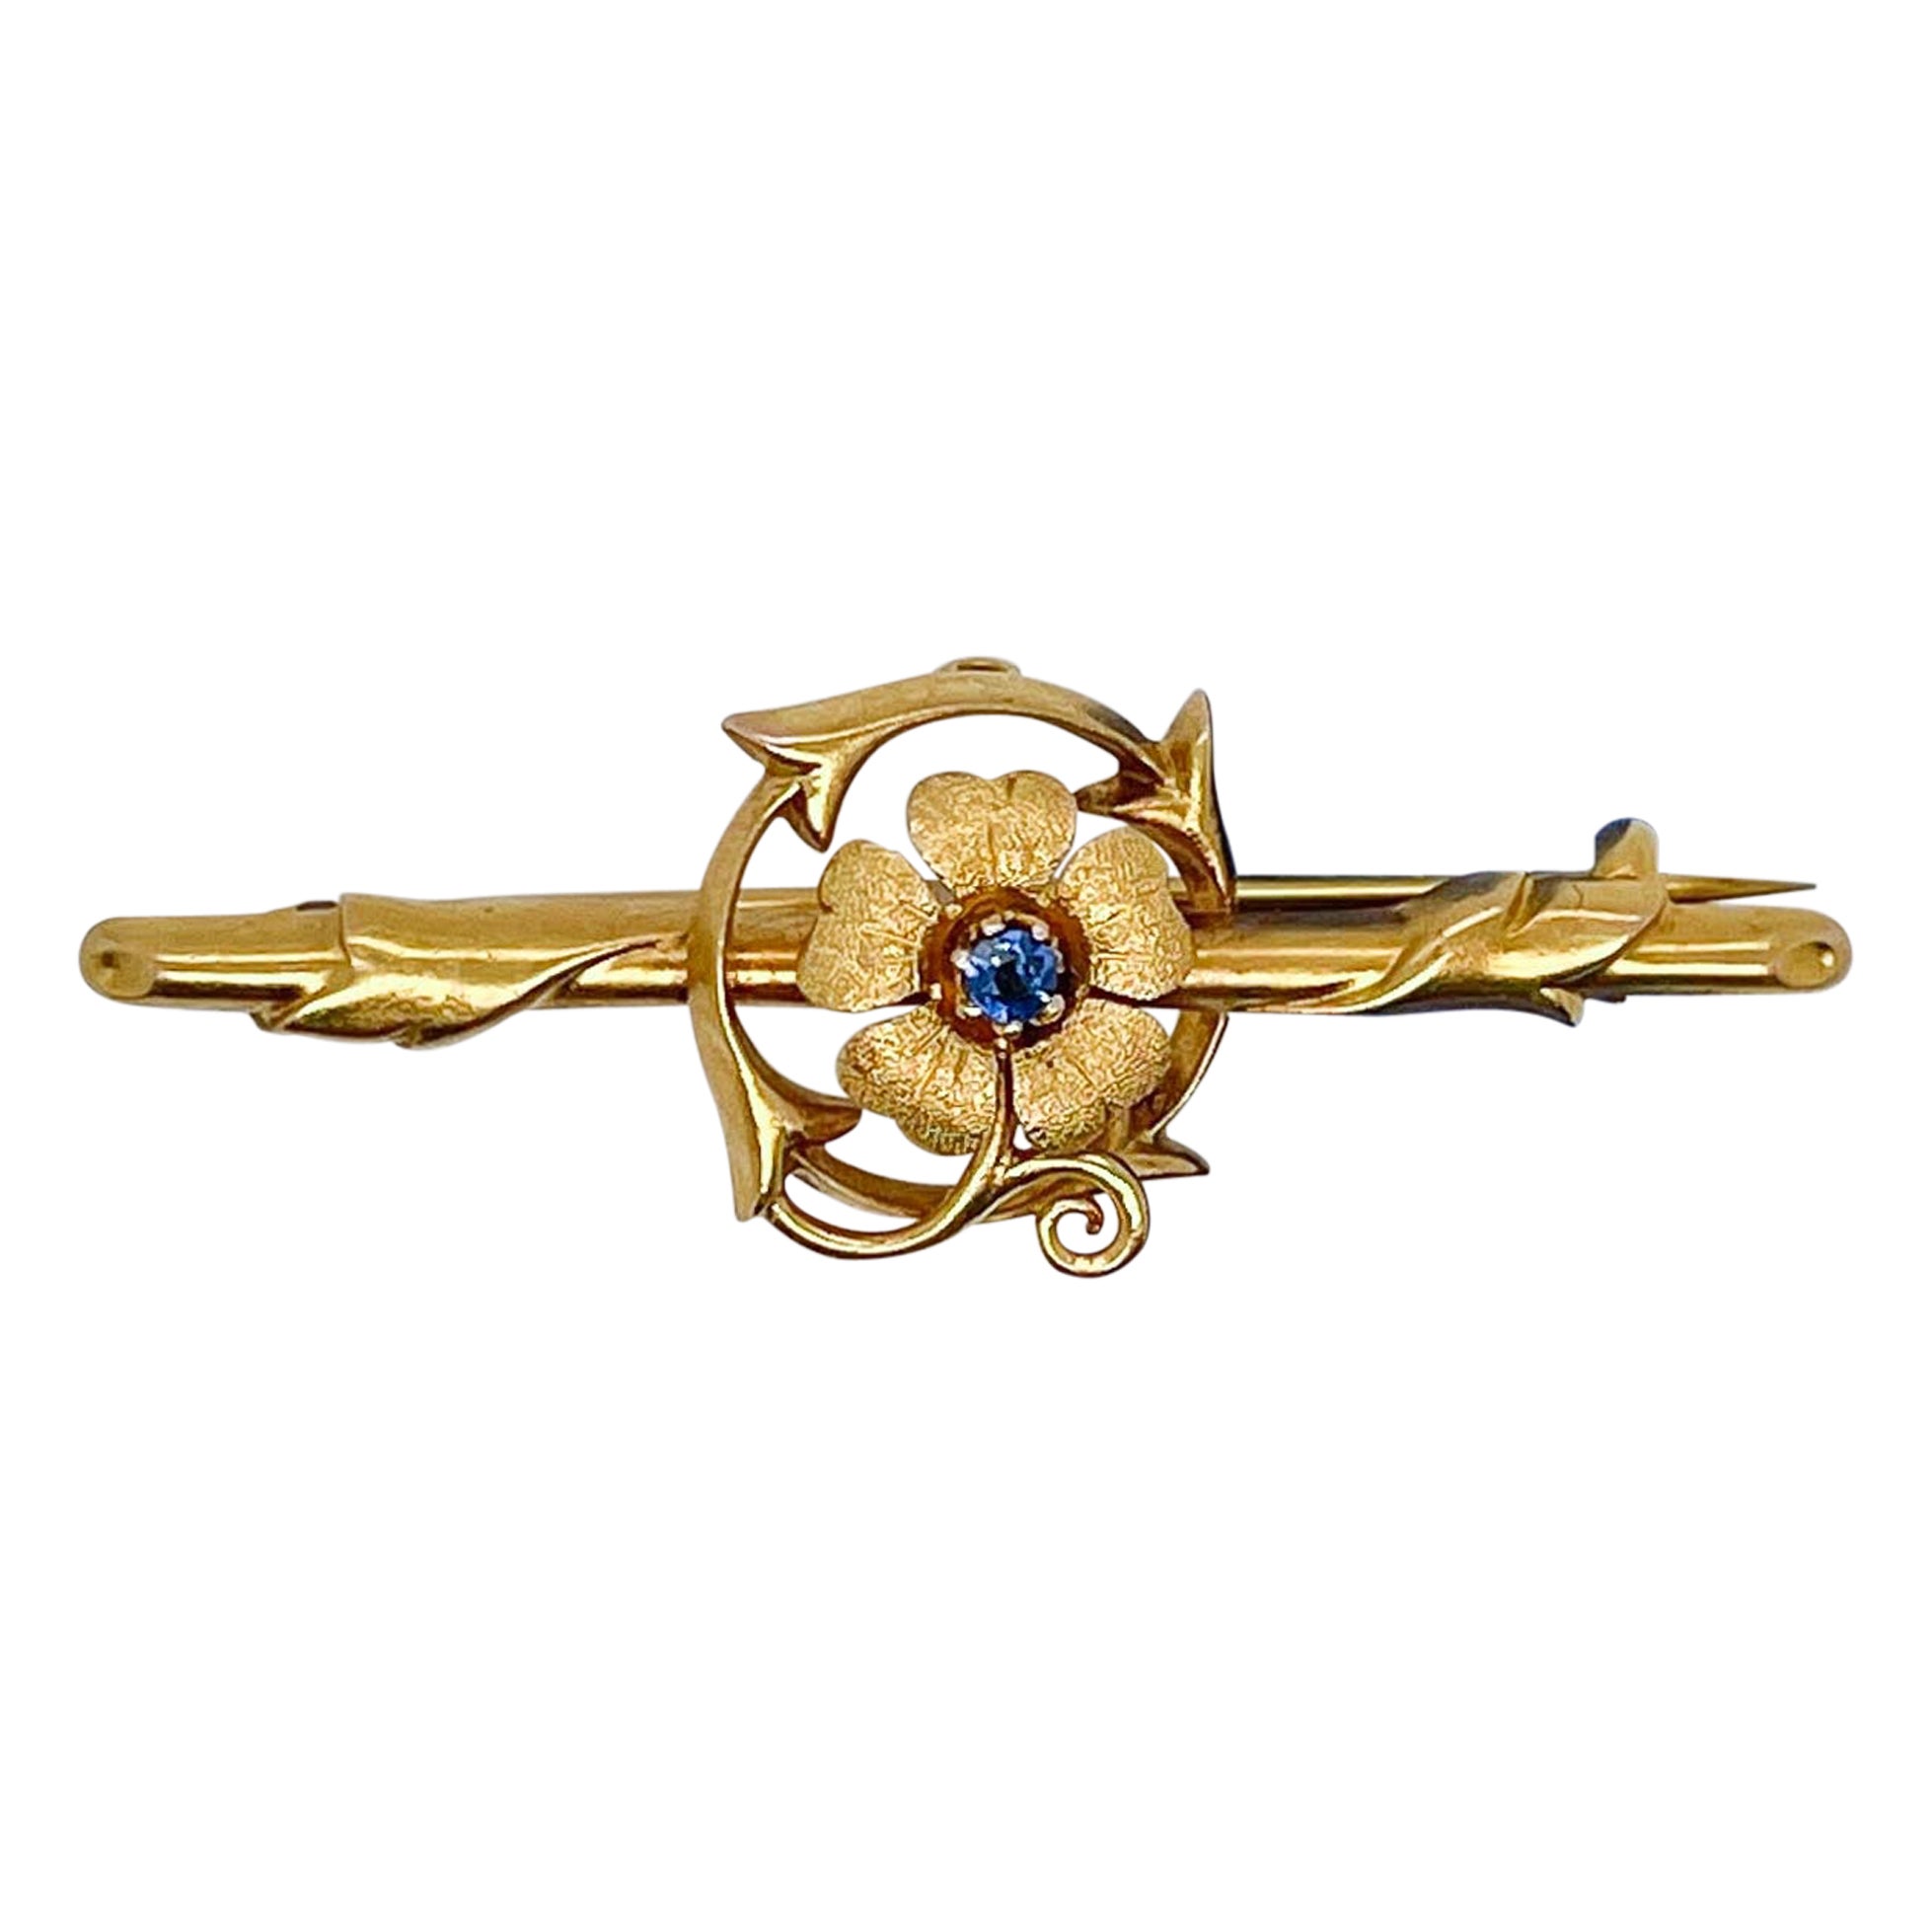 Signed Edwardian 15K Yellow Gold & Sapphire Flower Brooch or Bar Pin